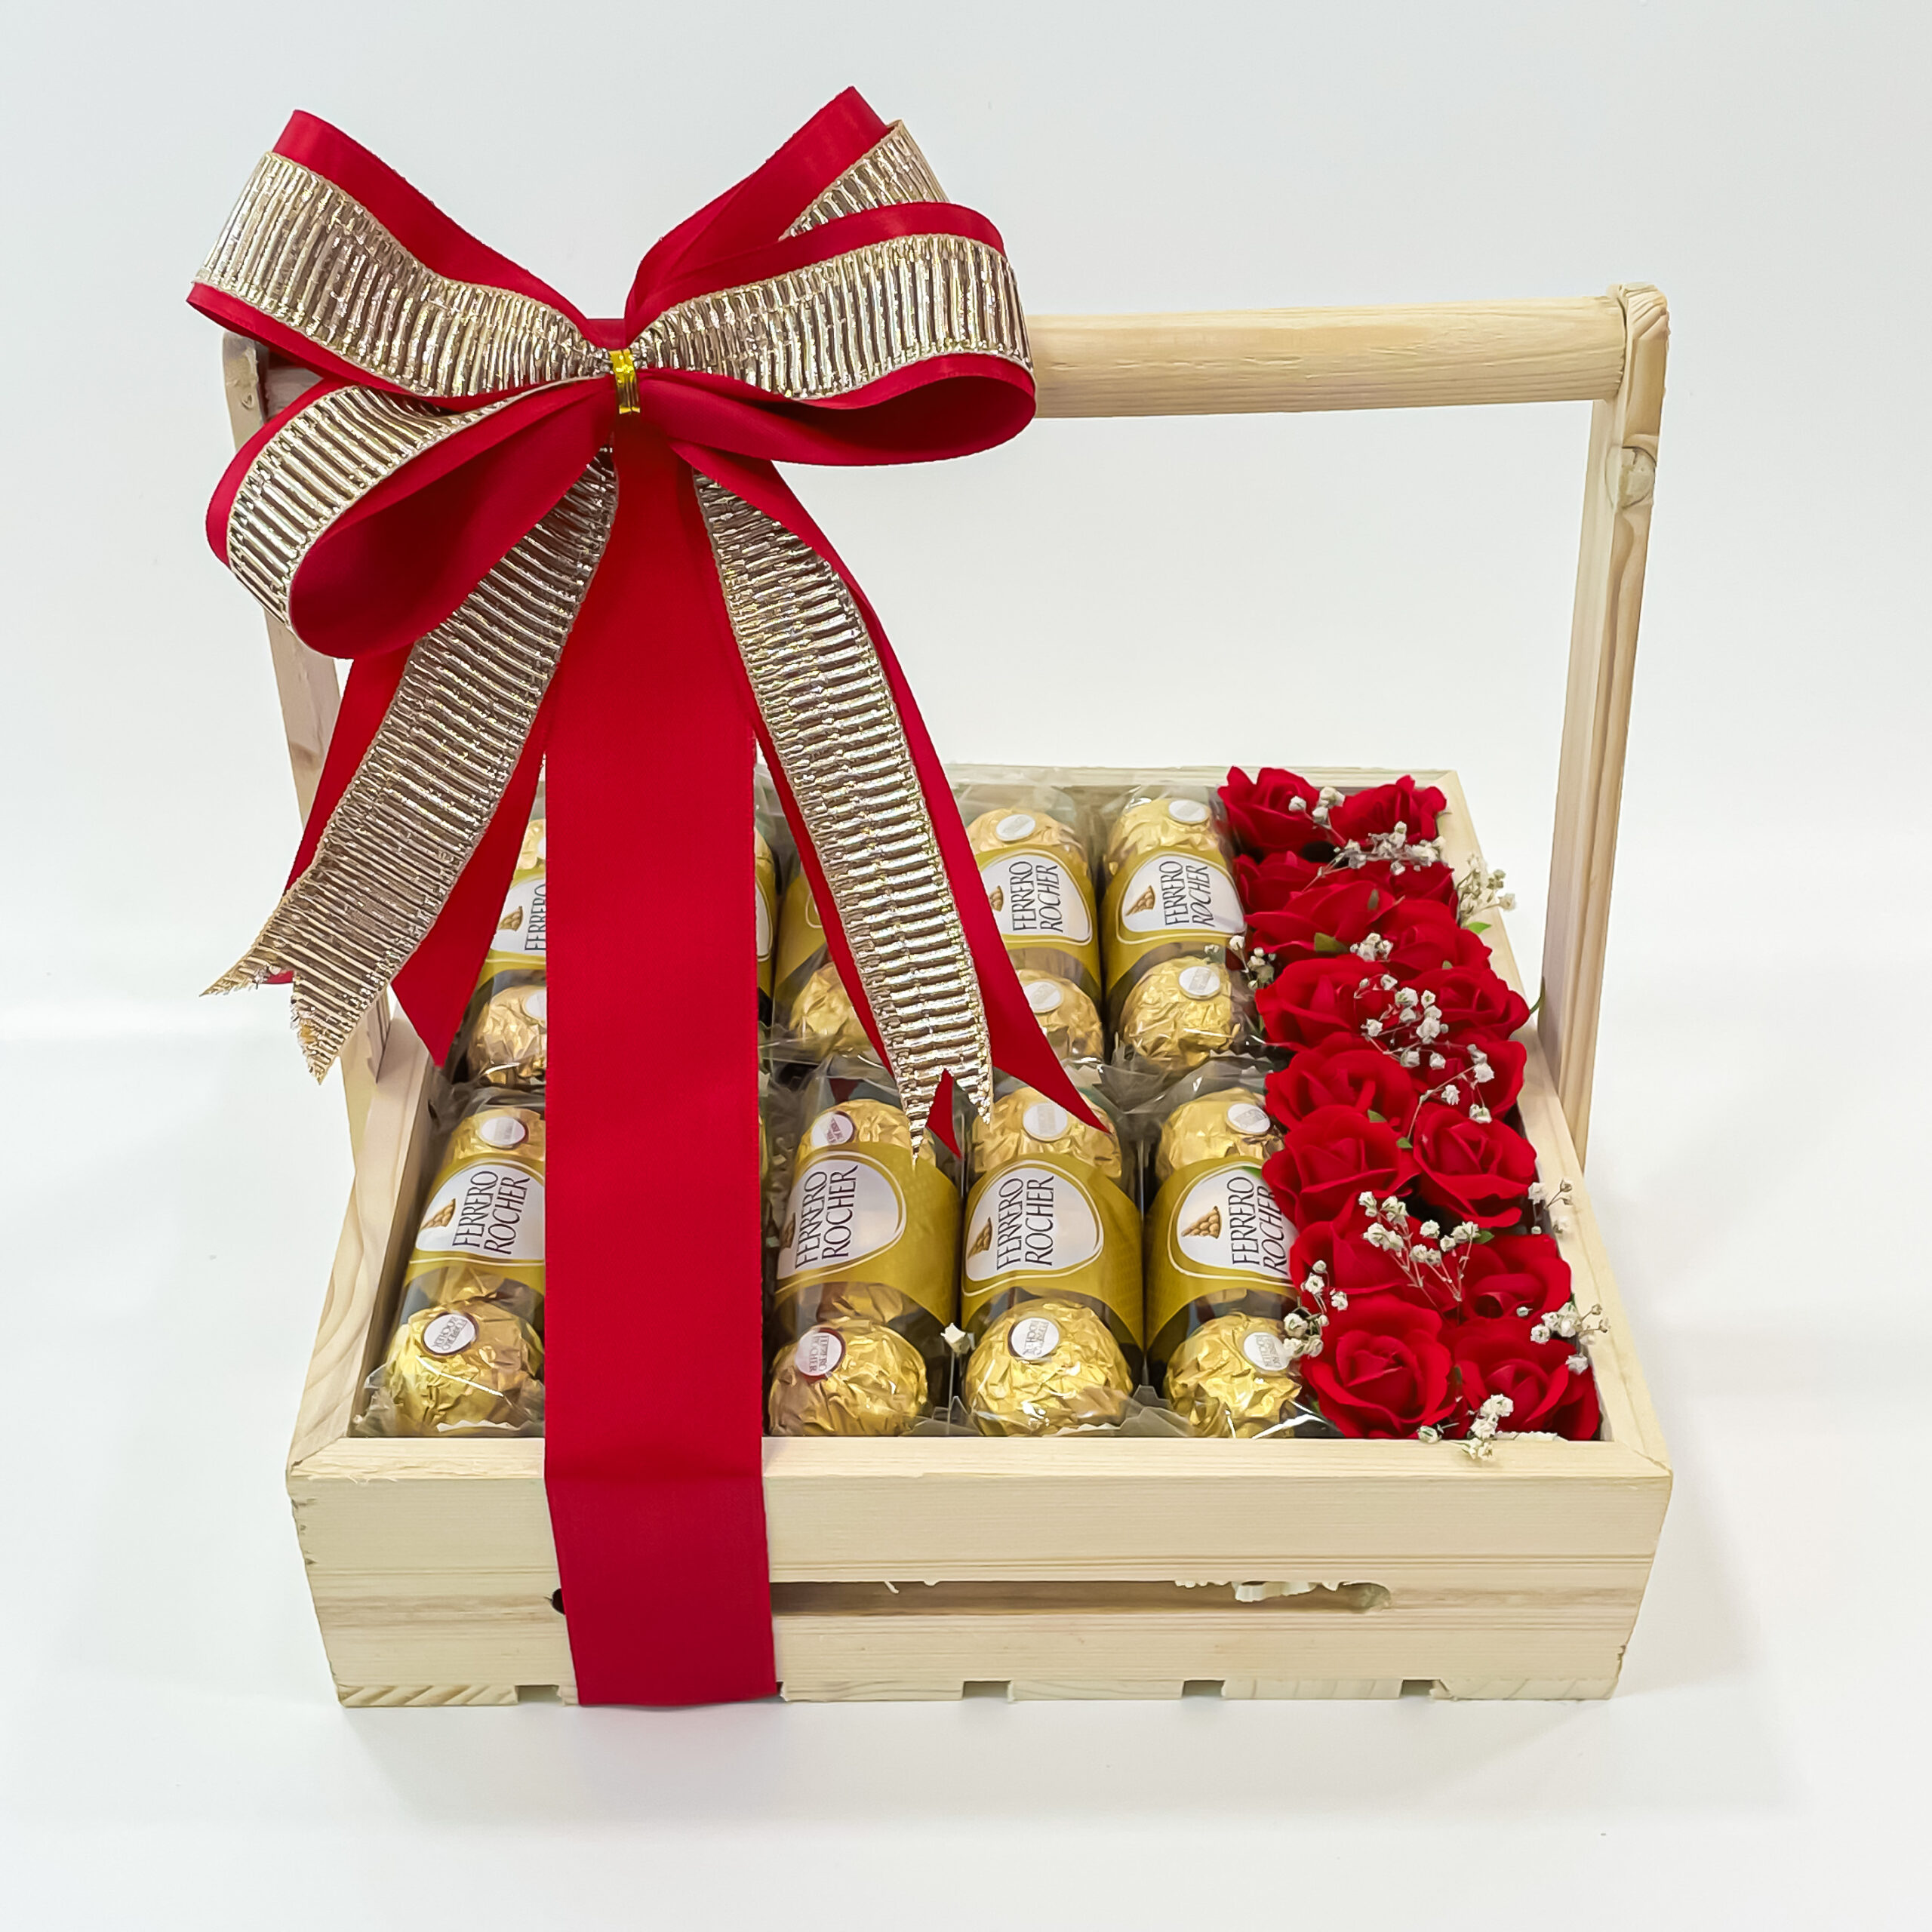 A Delicious Gourmet Snacks Hamper for your loved ones! | Kanpur